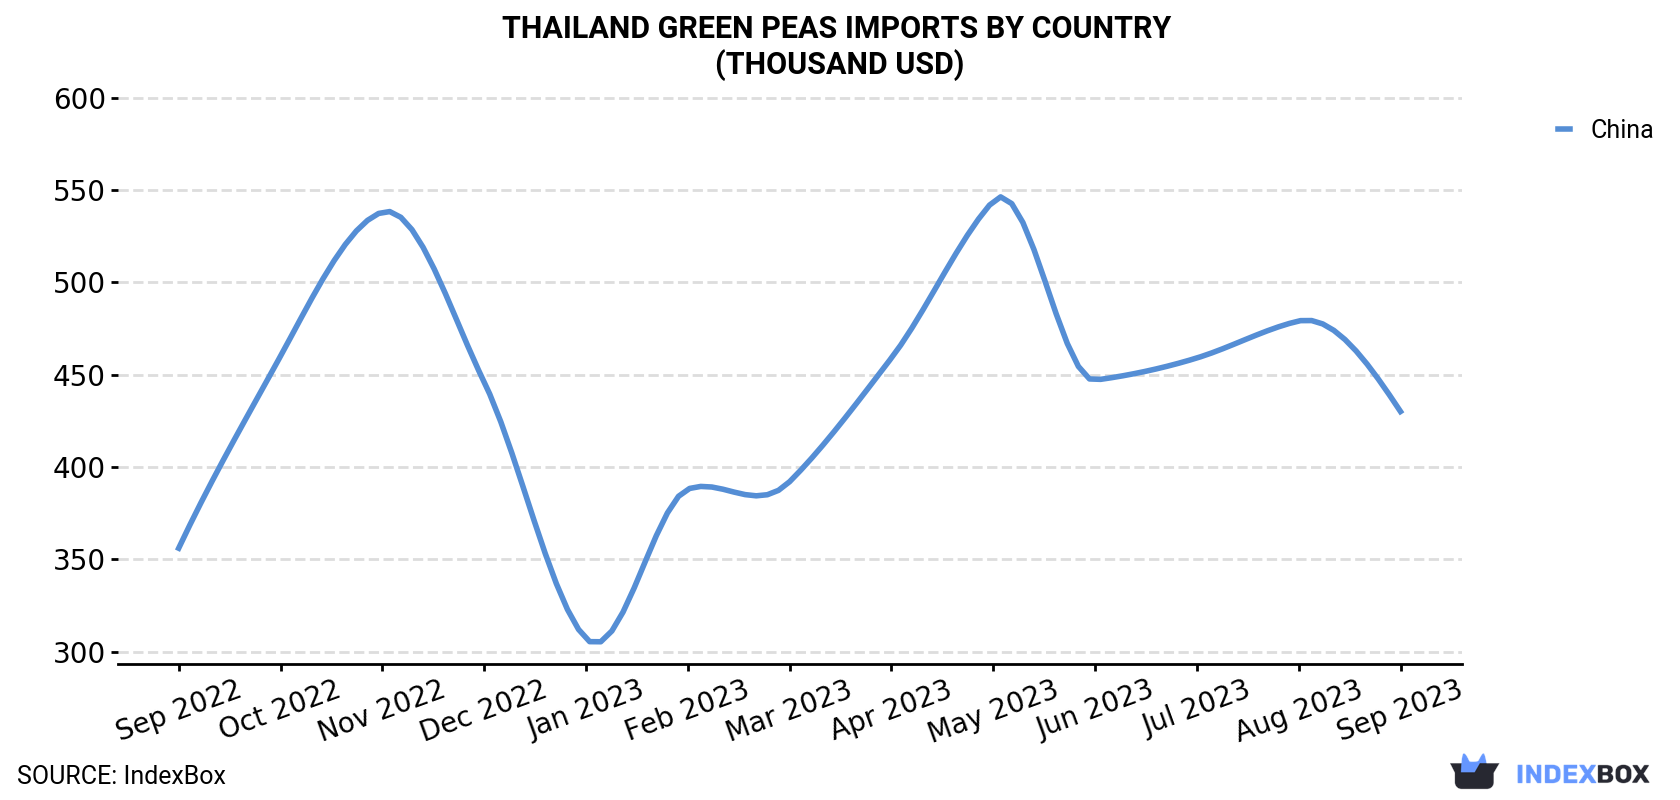 Thailand Green Peas Imports By Country (Thousand USD)